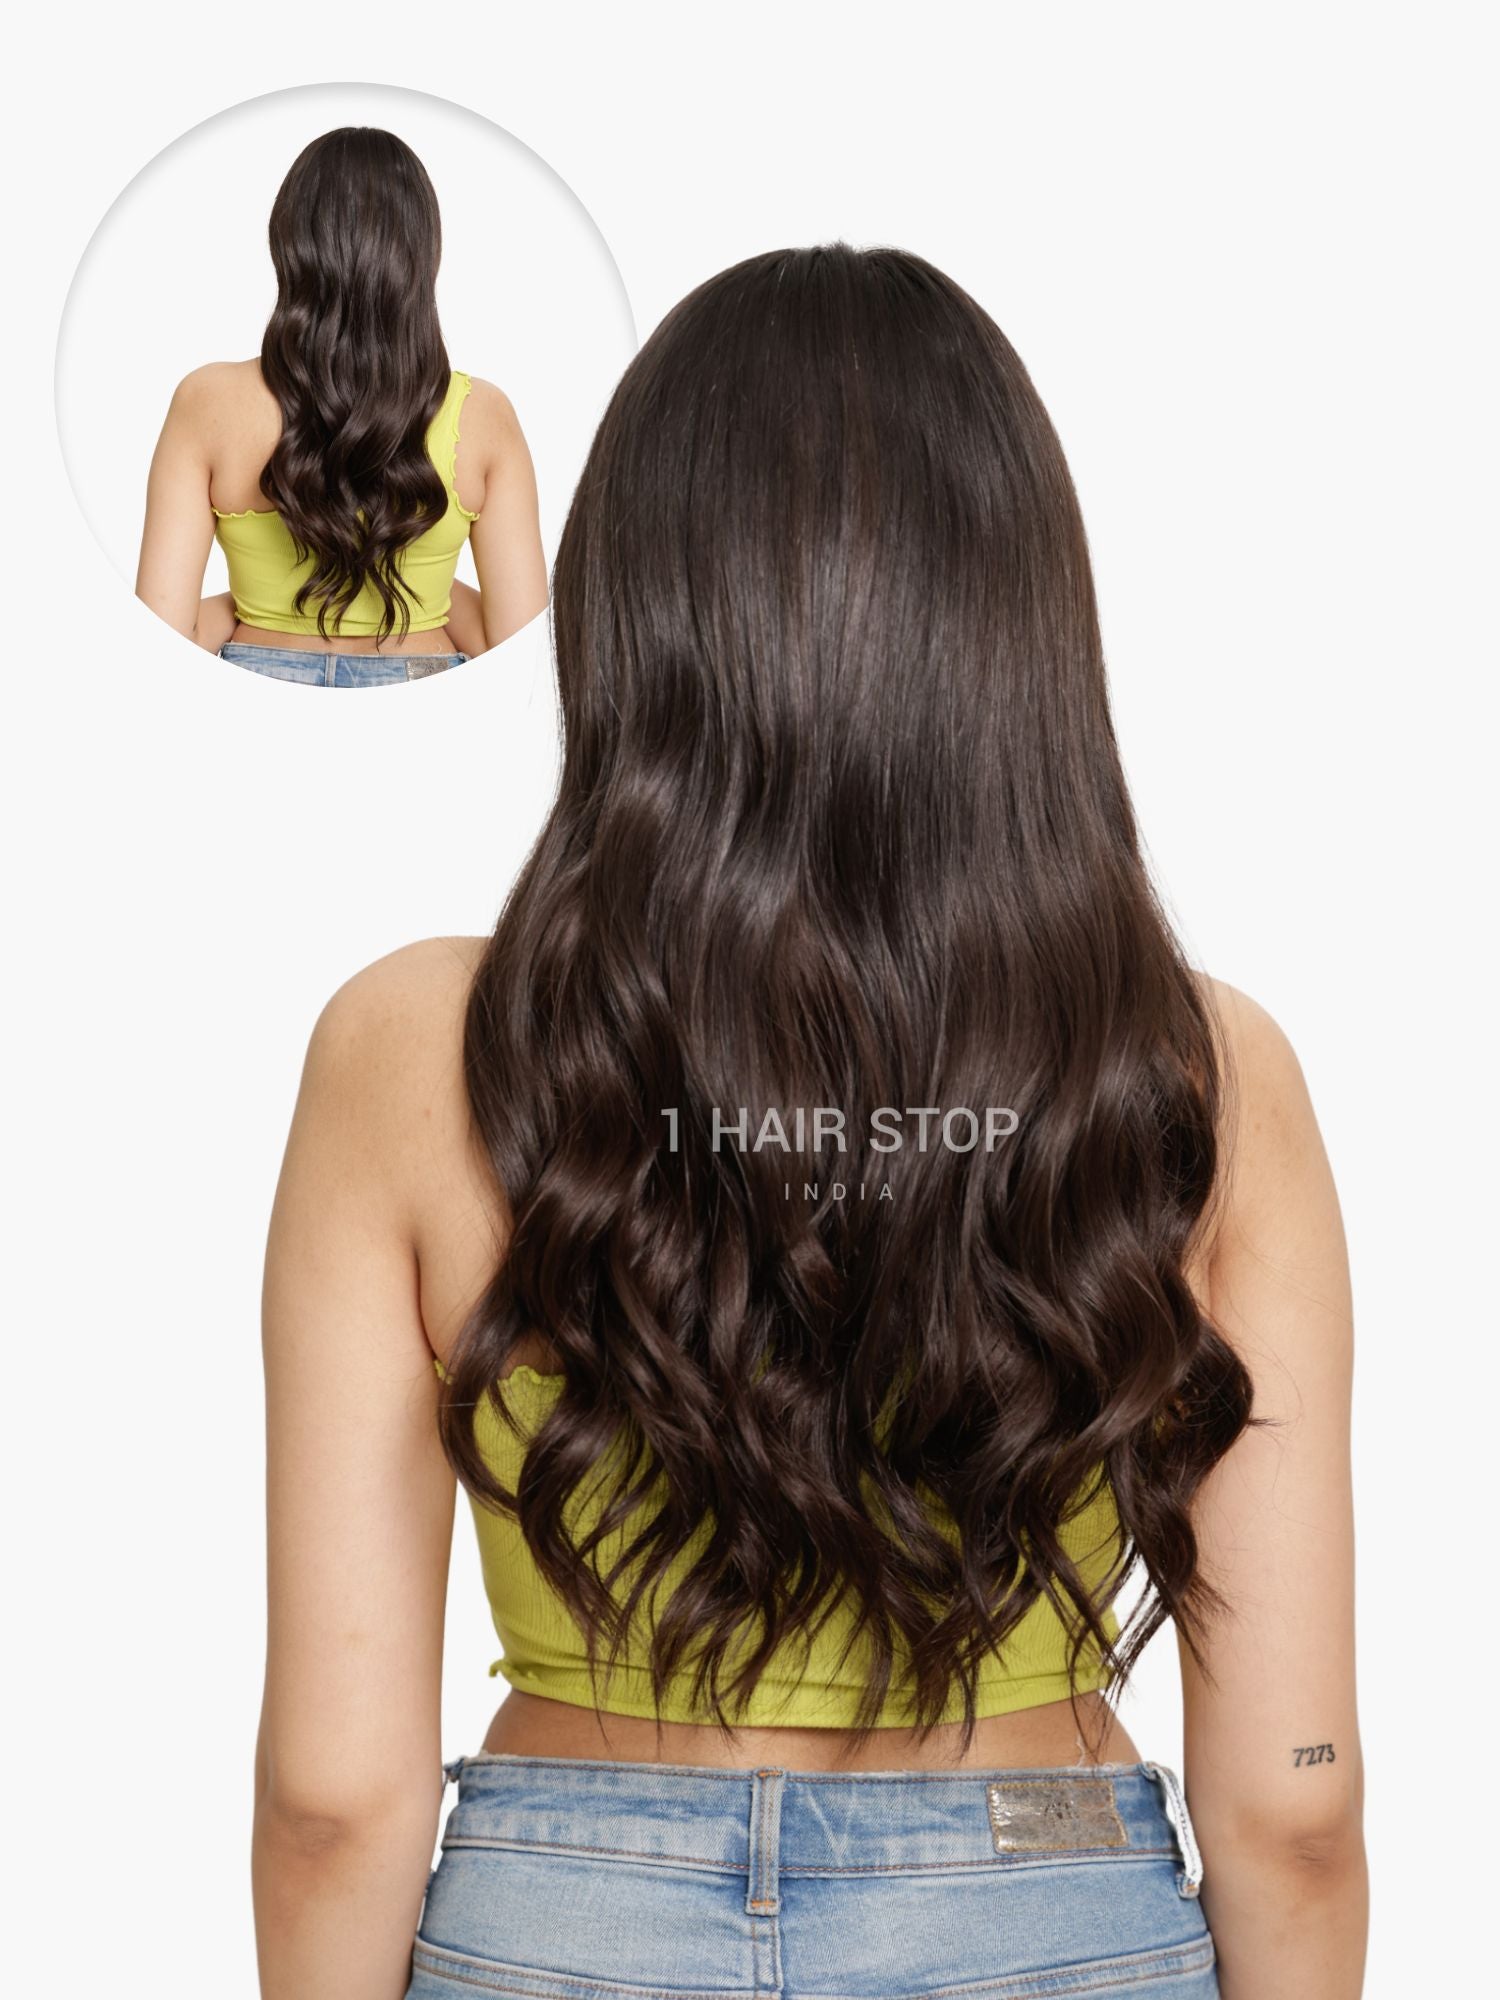 Curly Push Up Patches  Hair Extensions India  Curly Hair Extensions  1  Hair Stop India